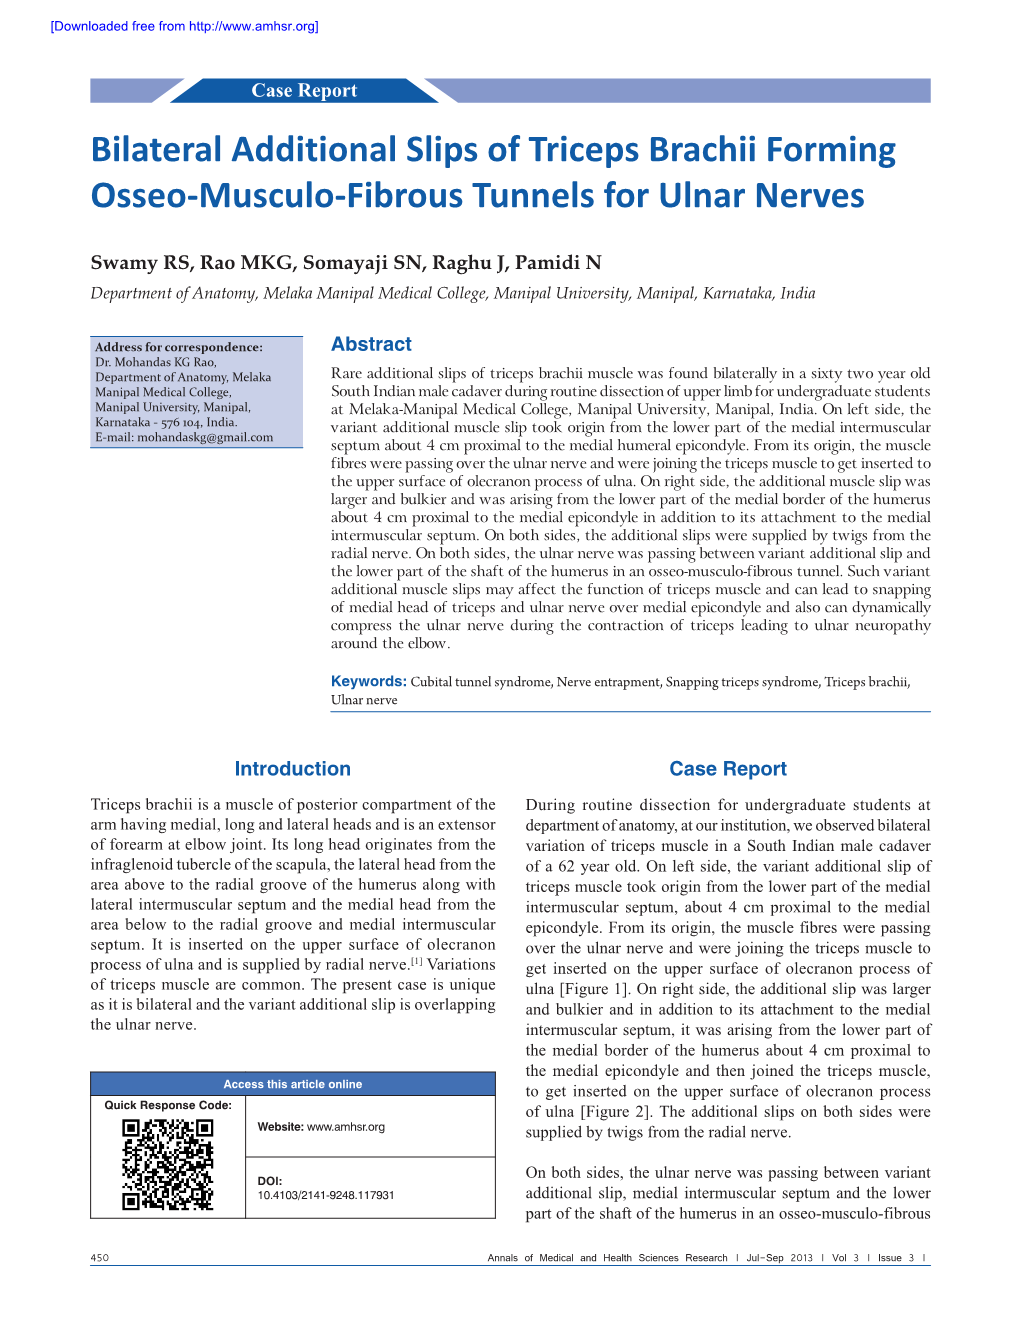 Bilateral Additional Slips of Triceps Brachii Forming Osseo‑Musculo‑Fibrous Tunnels for Ulnar Nerves